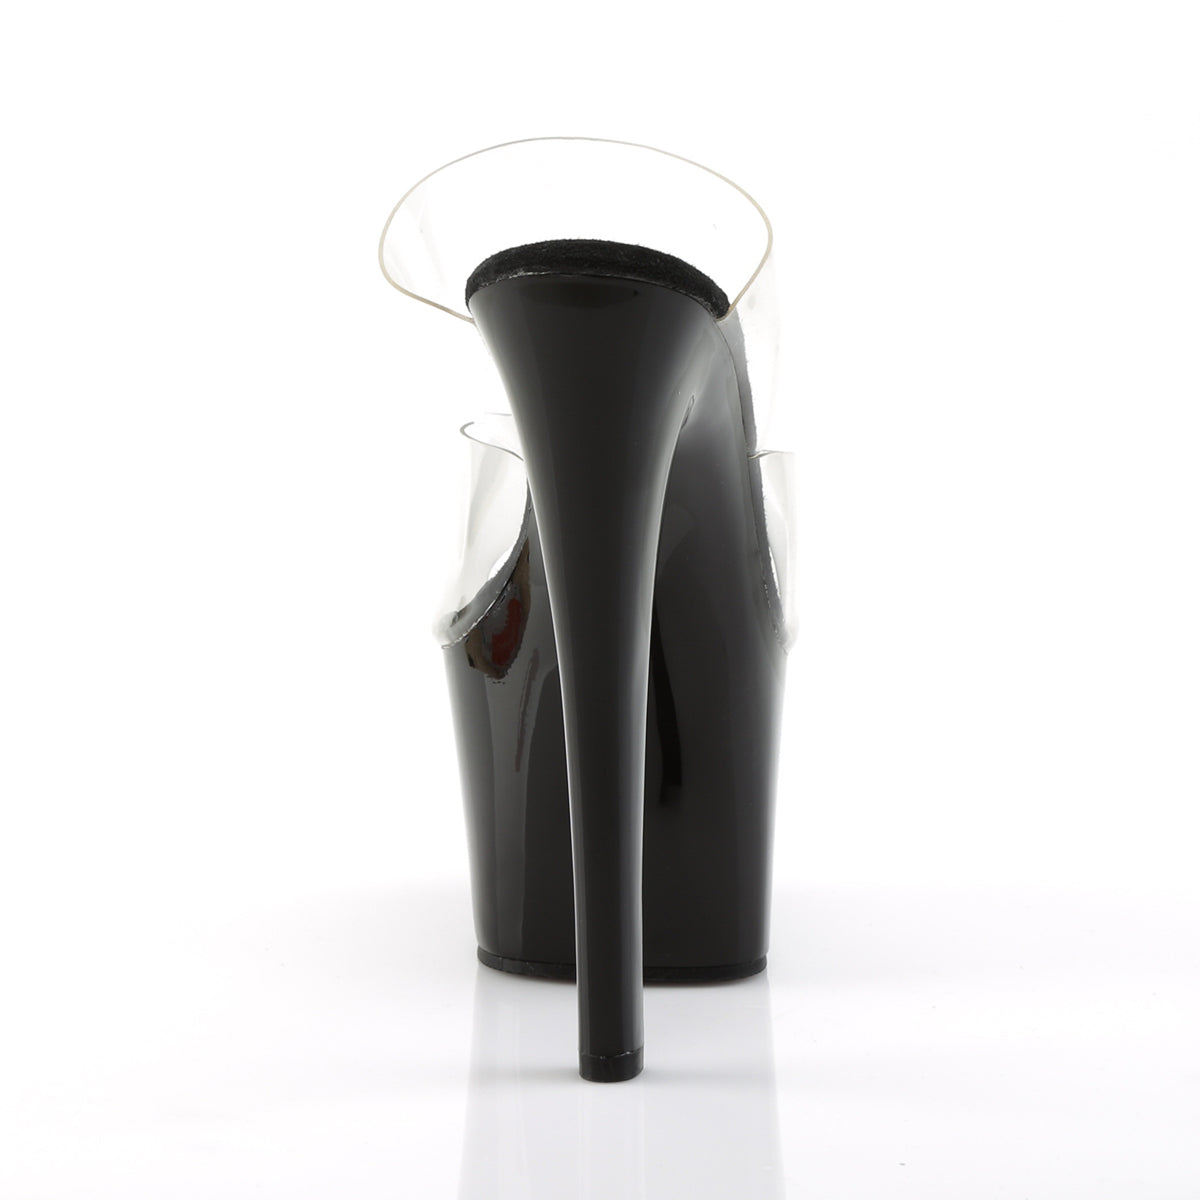 SKY-302 7" Heel Clear and Black Pole Dancing Platforms-Pleaser- Sexy Shoes Fetish Footwear